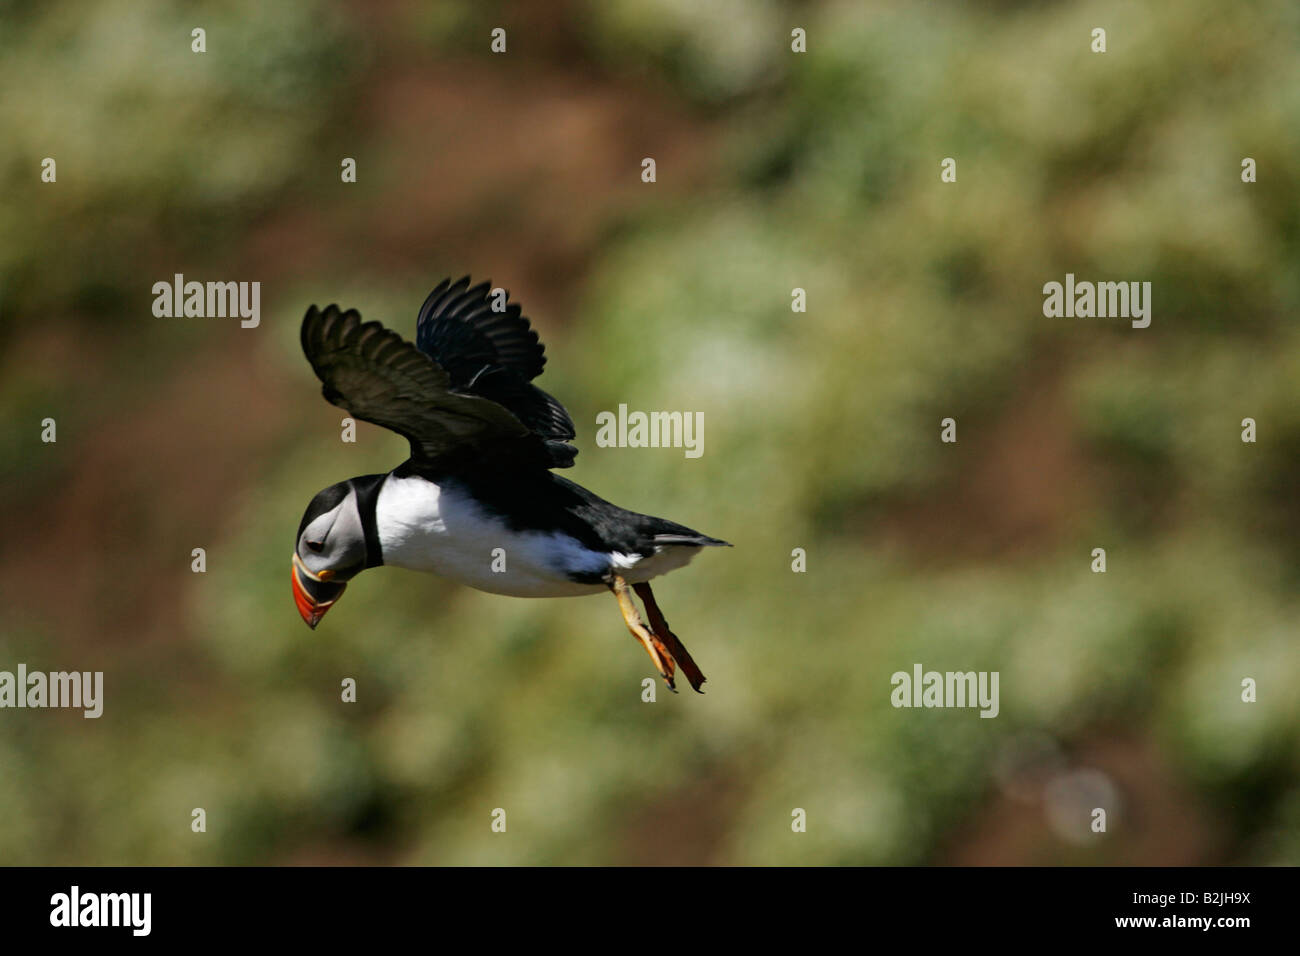 Puffin in air coming in to land Stock Photo